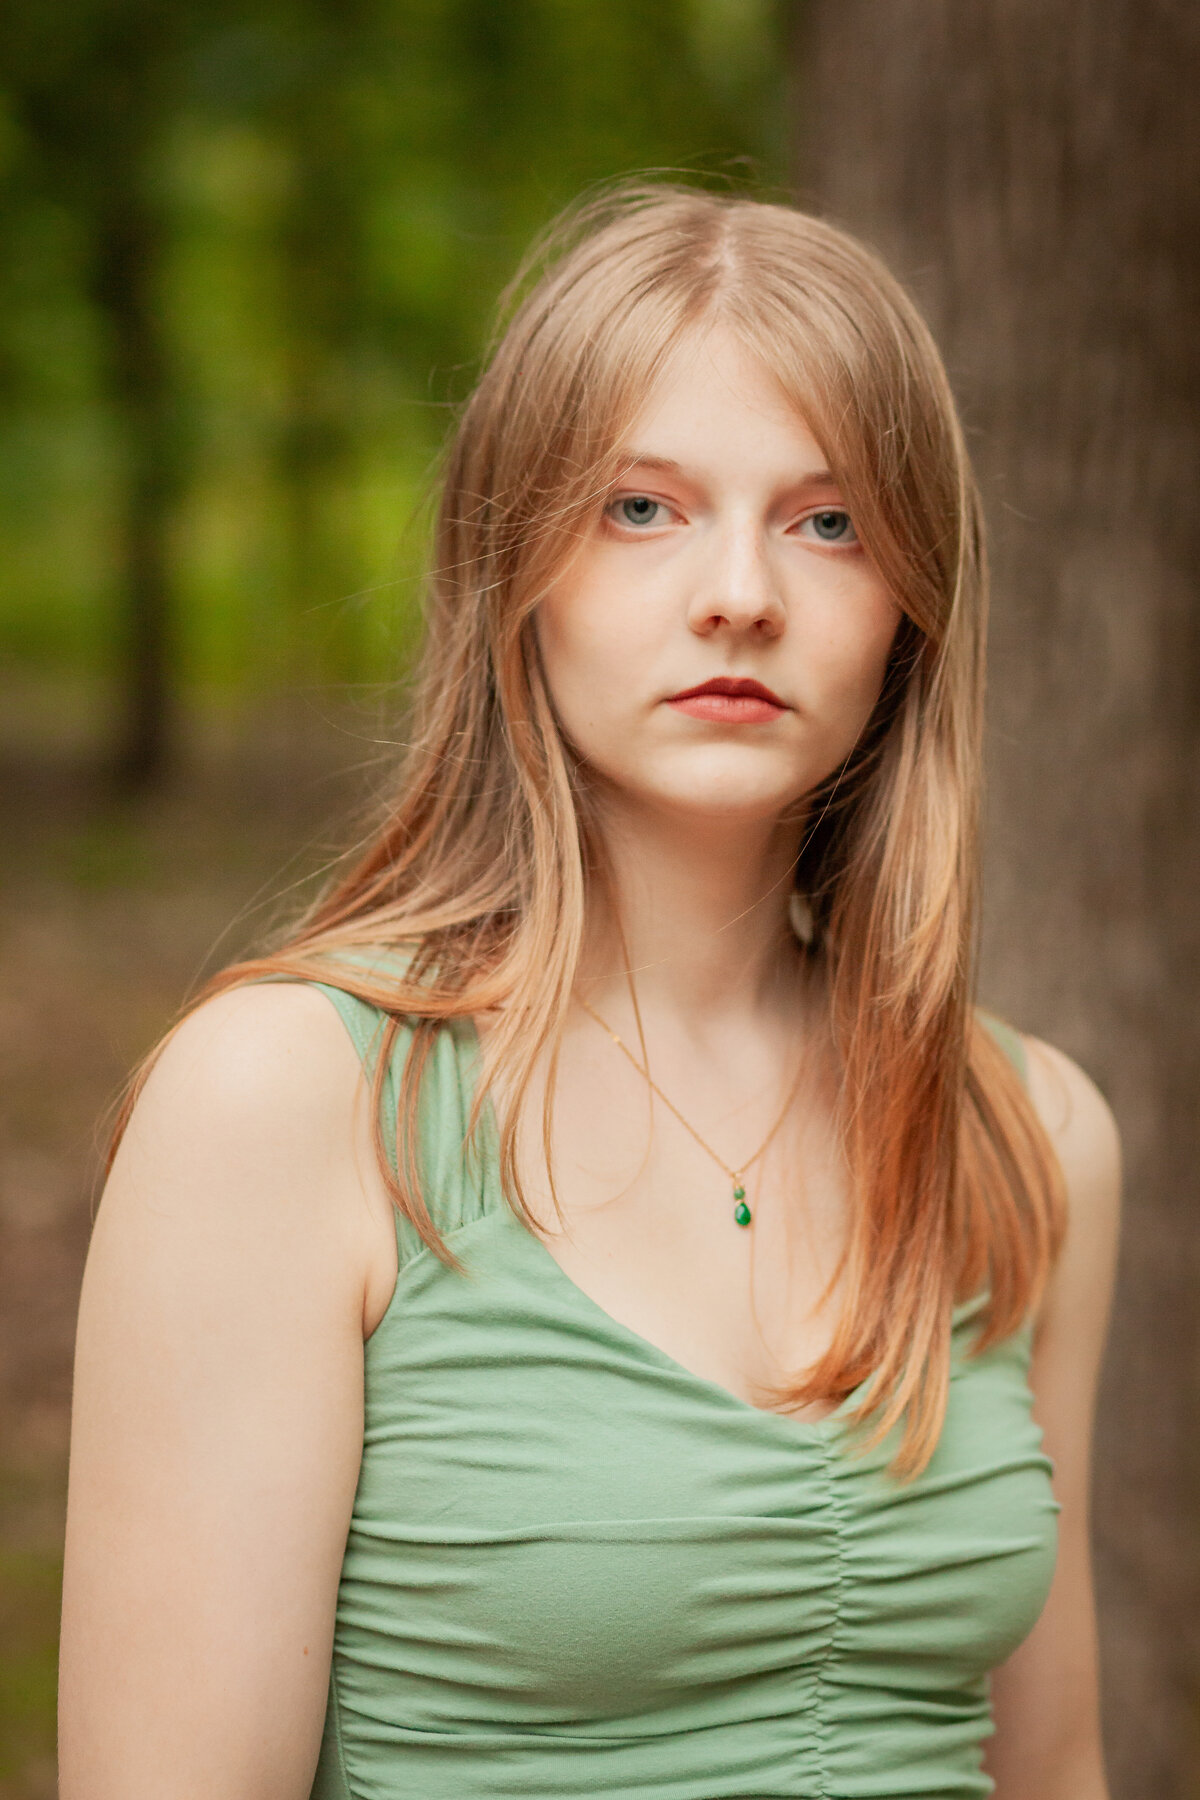 piercing eyes girl with green shirt serious look